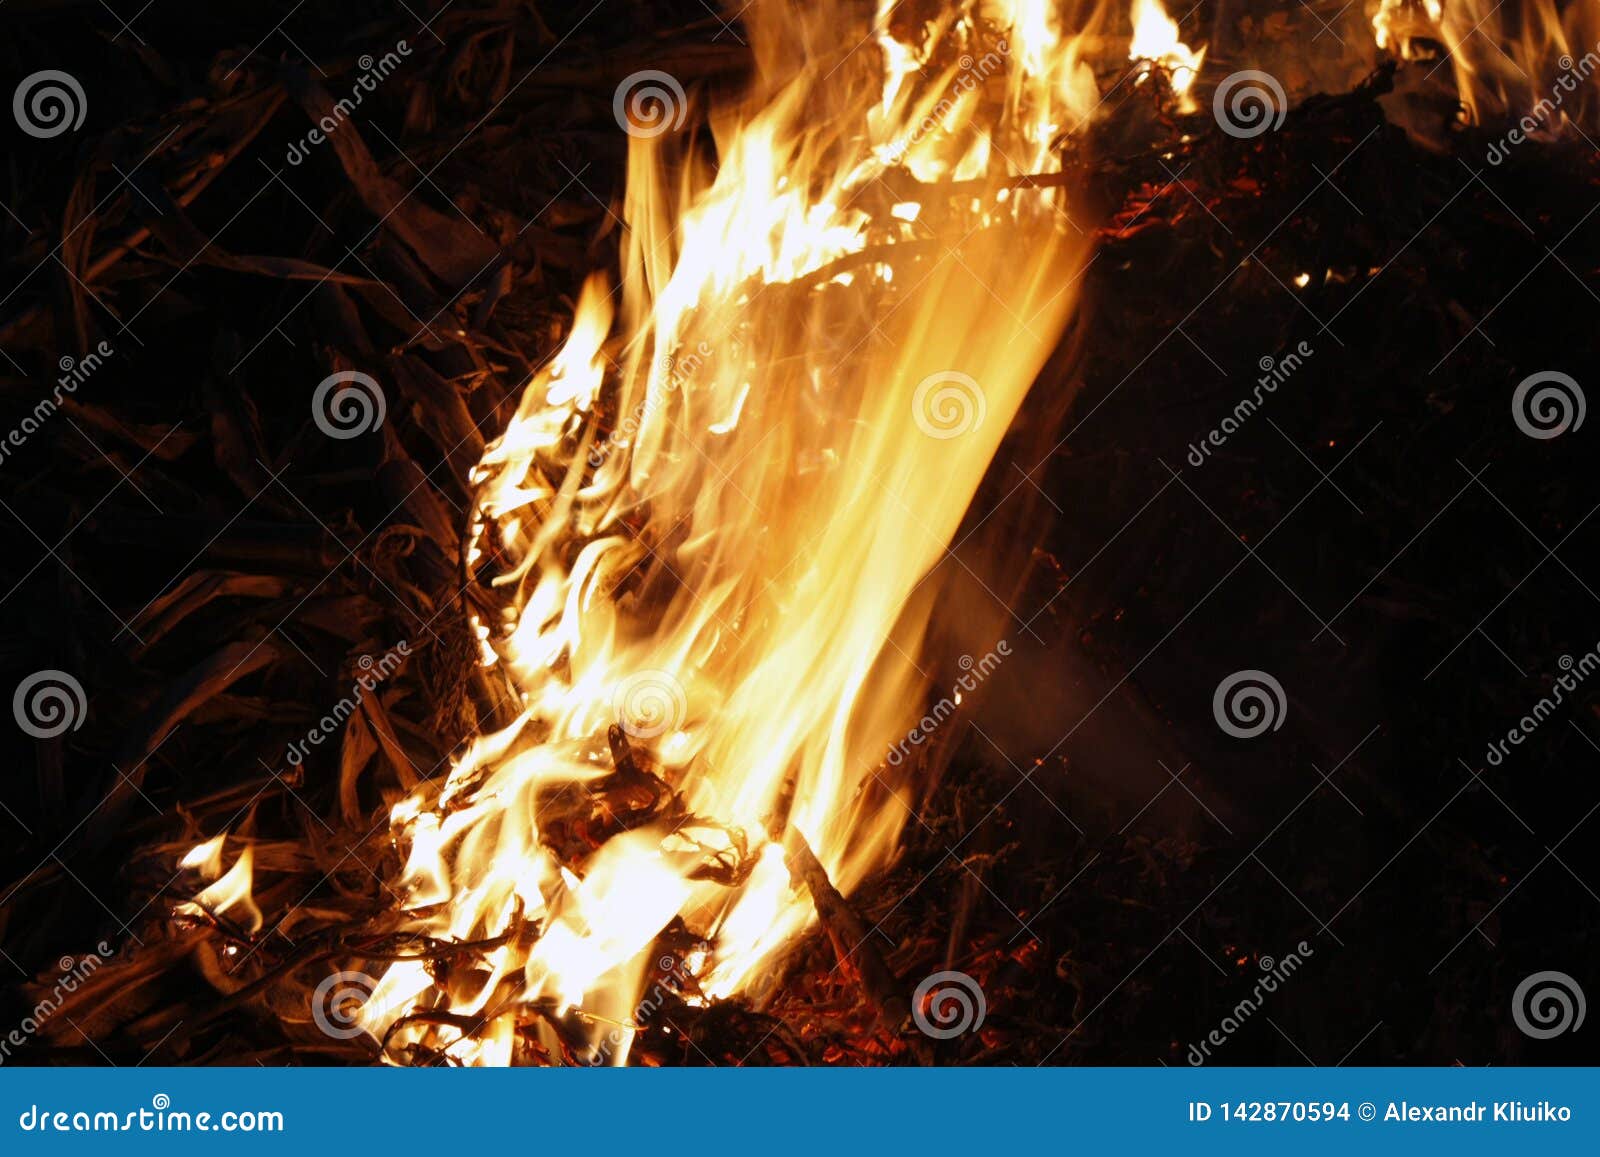 fire, flames on a black background, fire texture